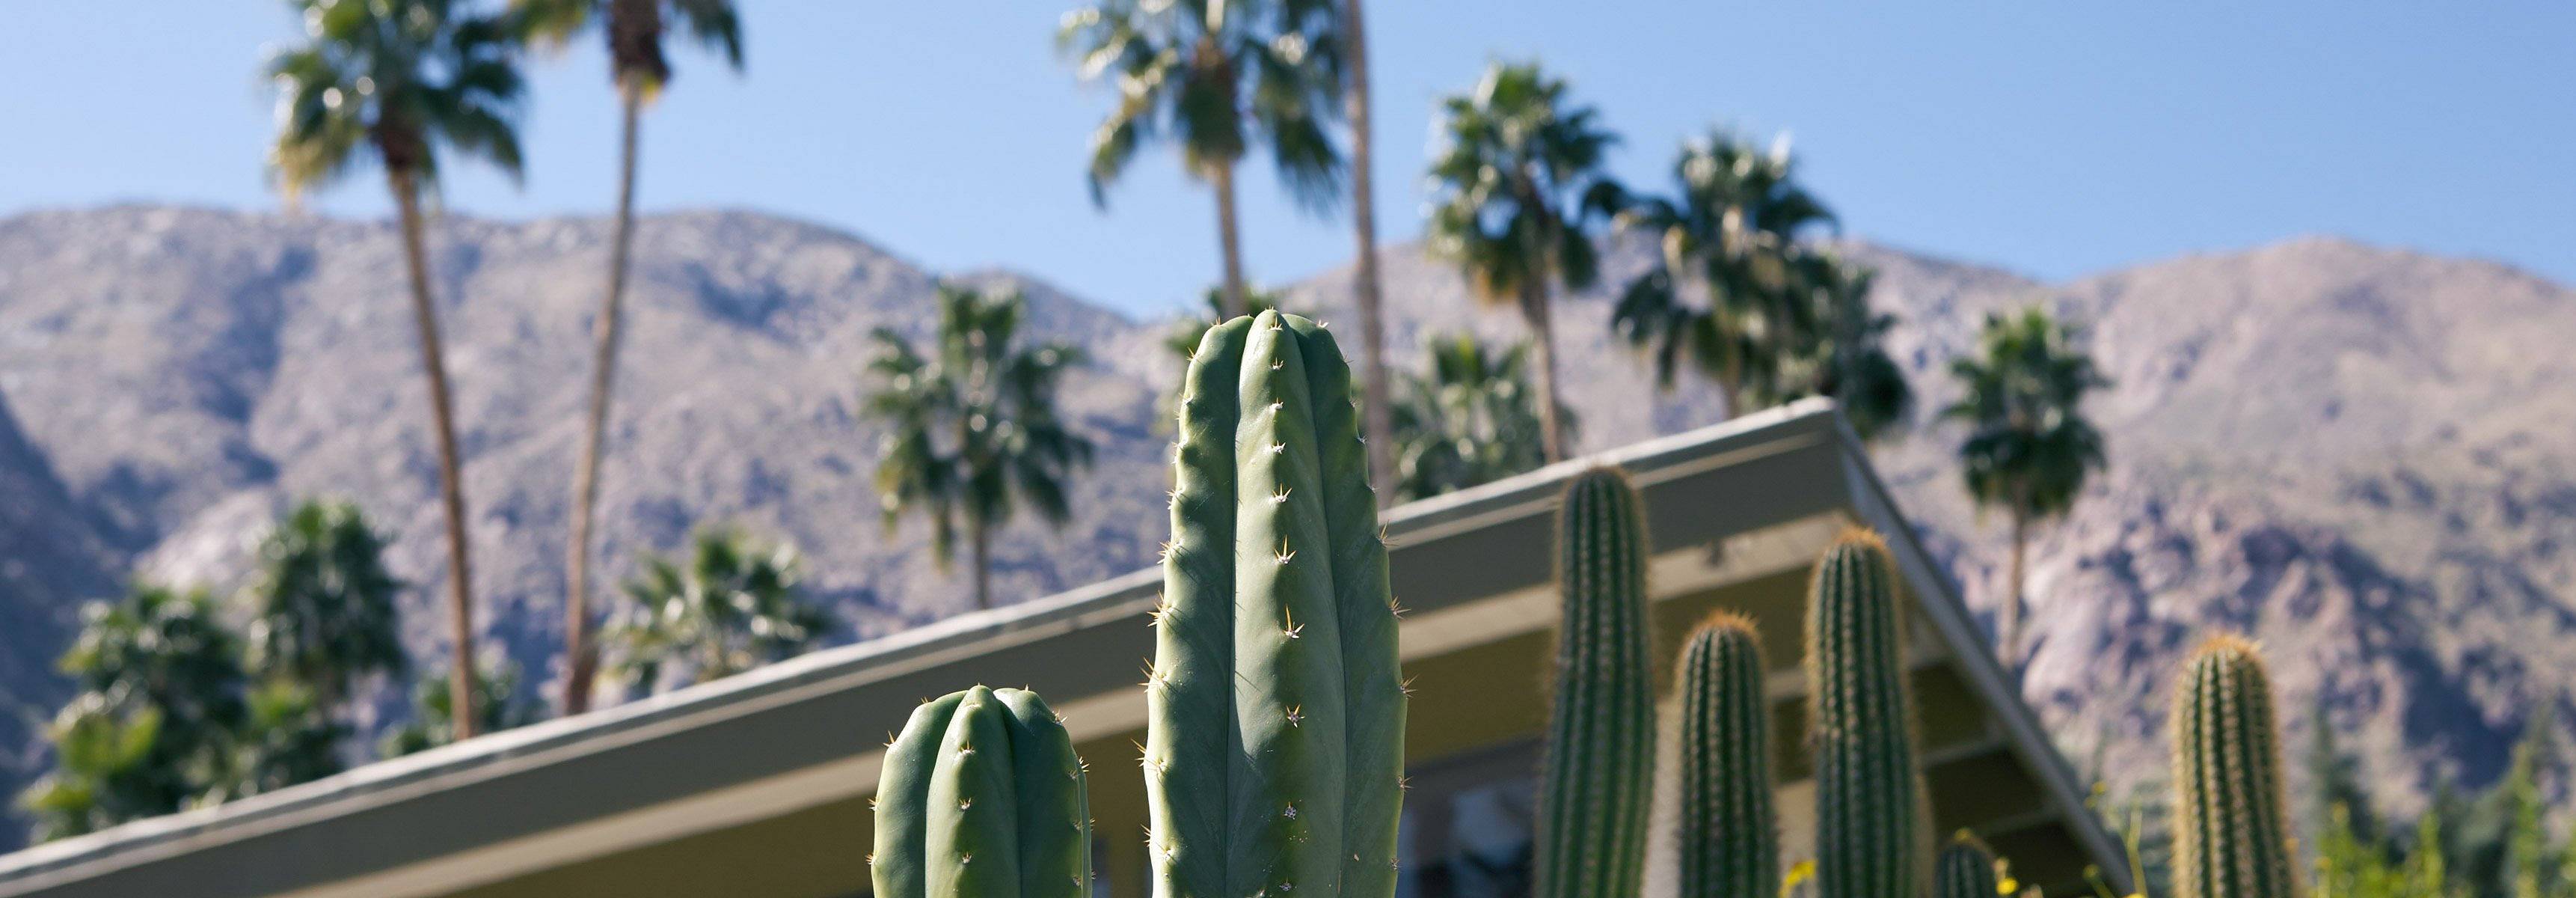 Palm springs home surround by cactus, palm trees